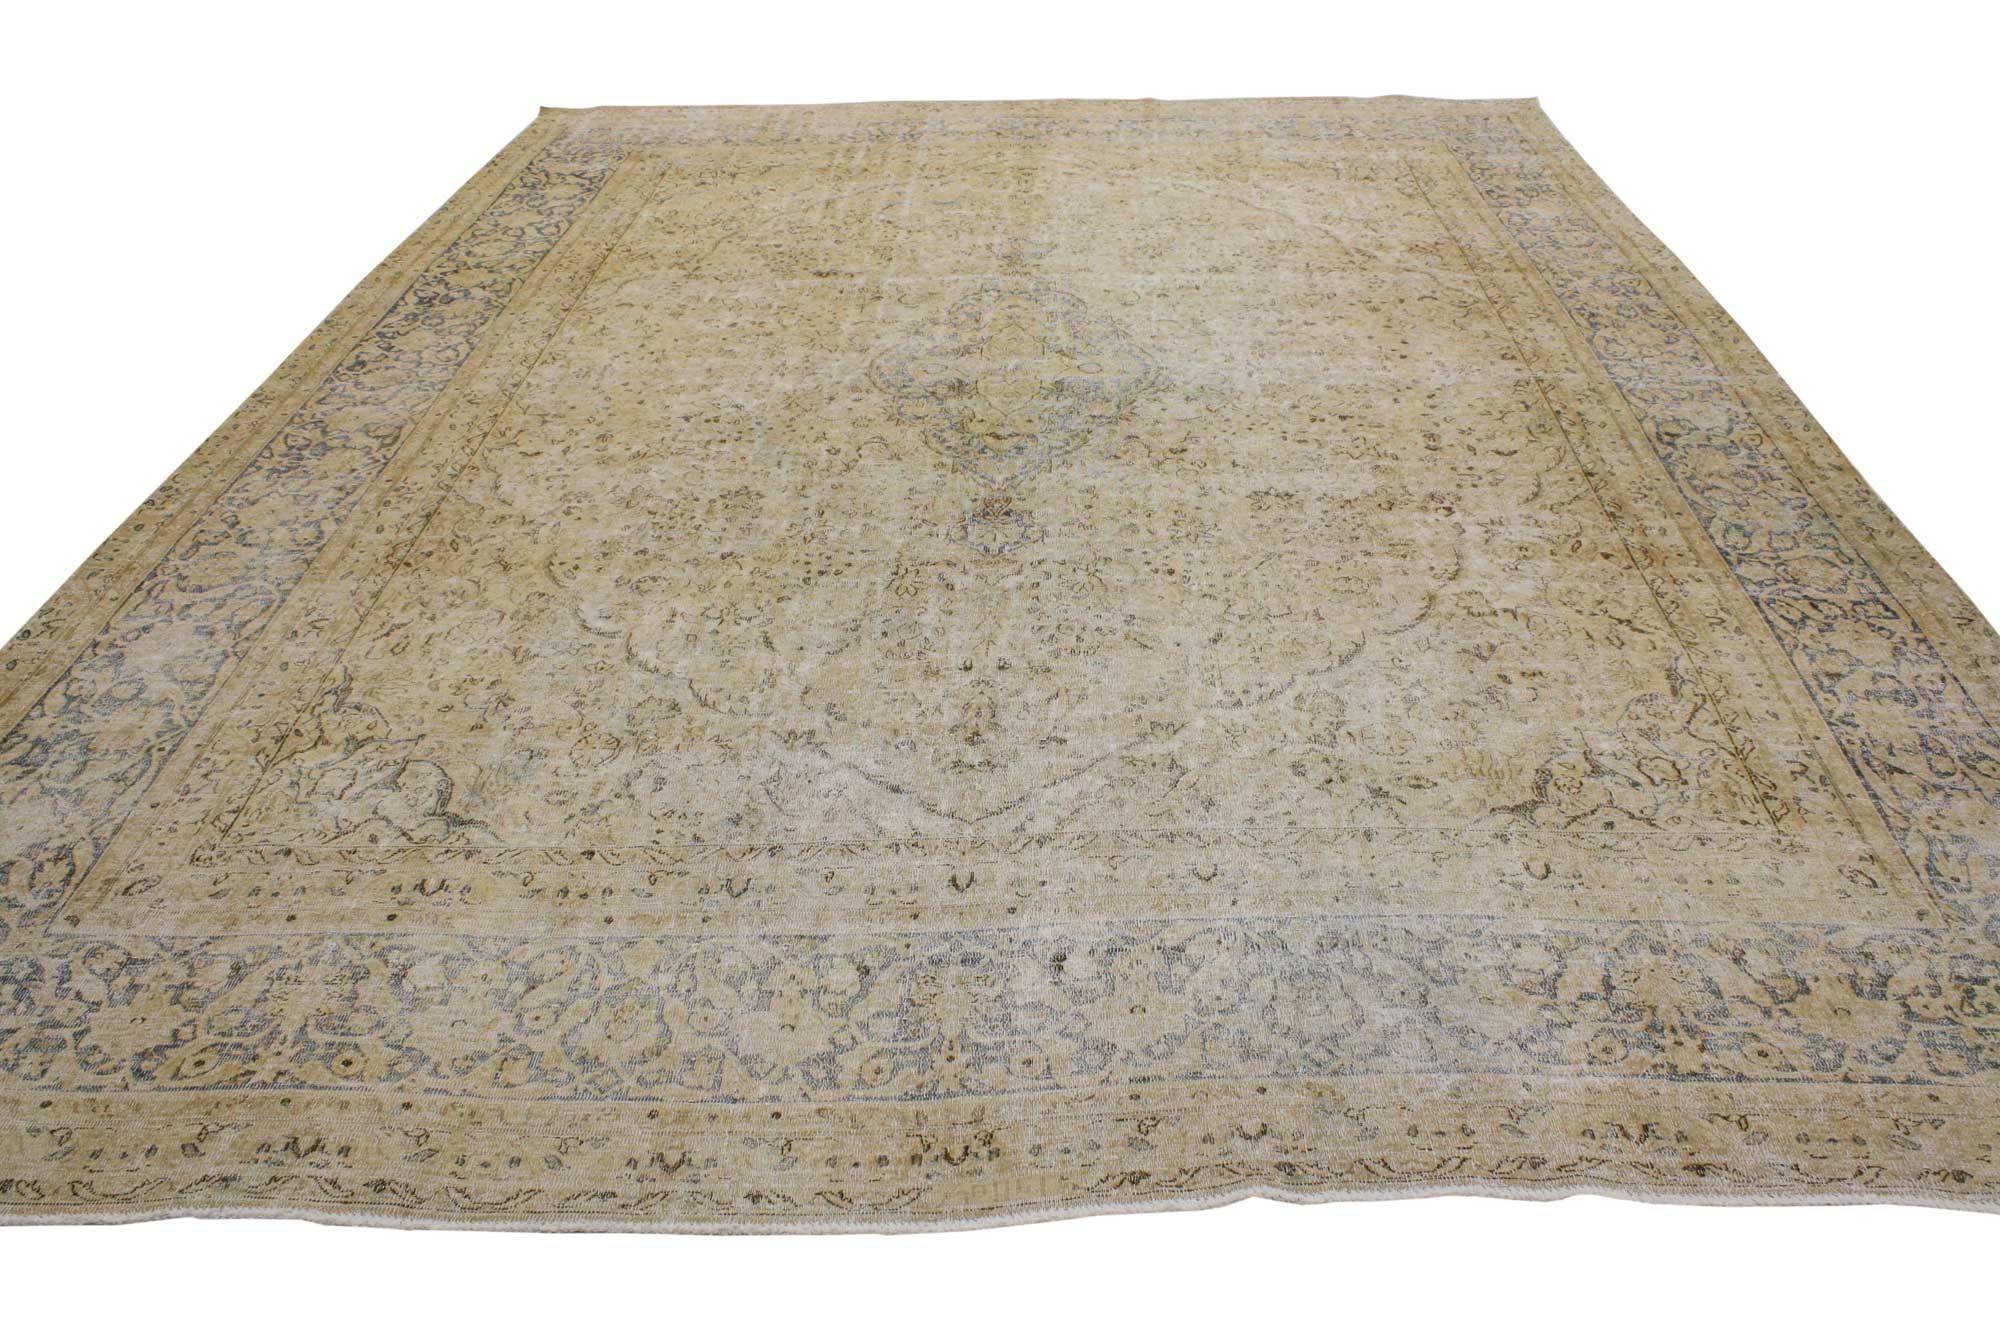 80312 Distressed Vintage Persian Kerman Area Rug with English Country Cottage Style 09'03 x 13'00. Warm and inviting with rustic sensibility, this hand-knotted wool vintage Persian Kerman rug is poised to impress. The antique washed field features a